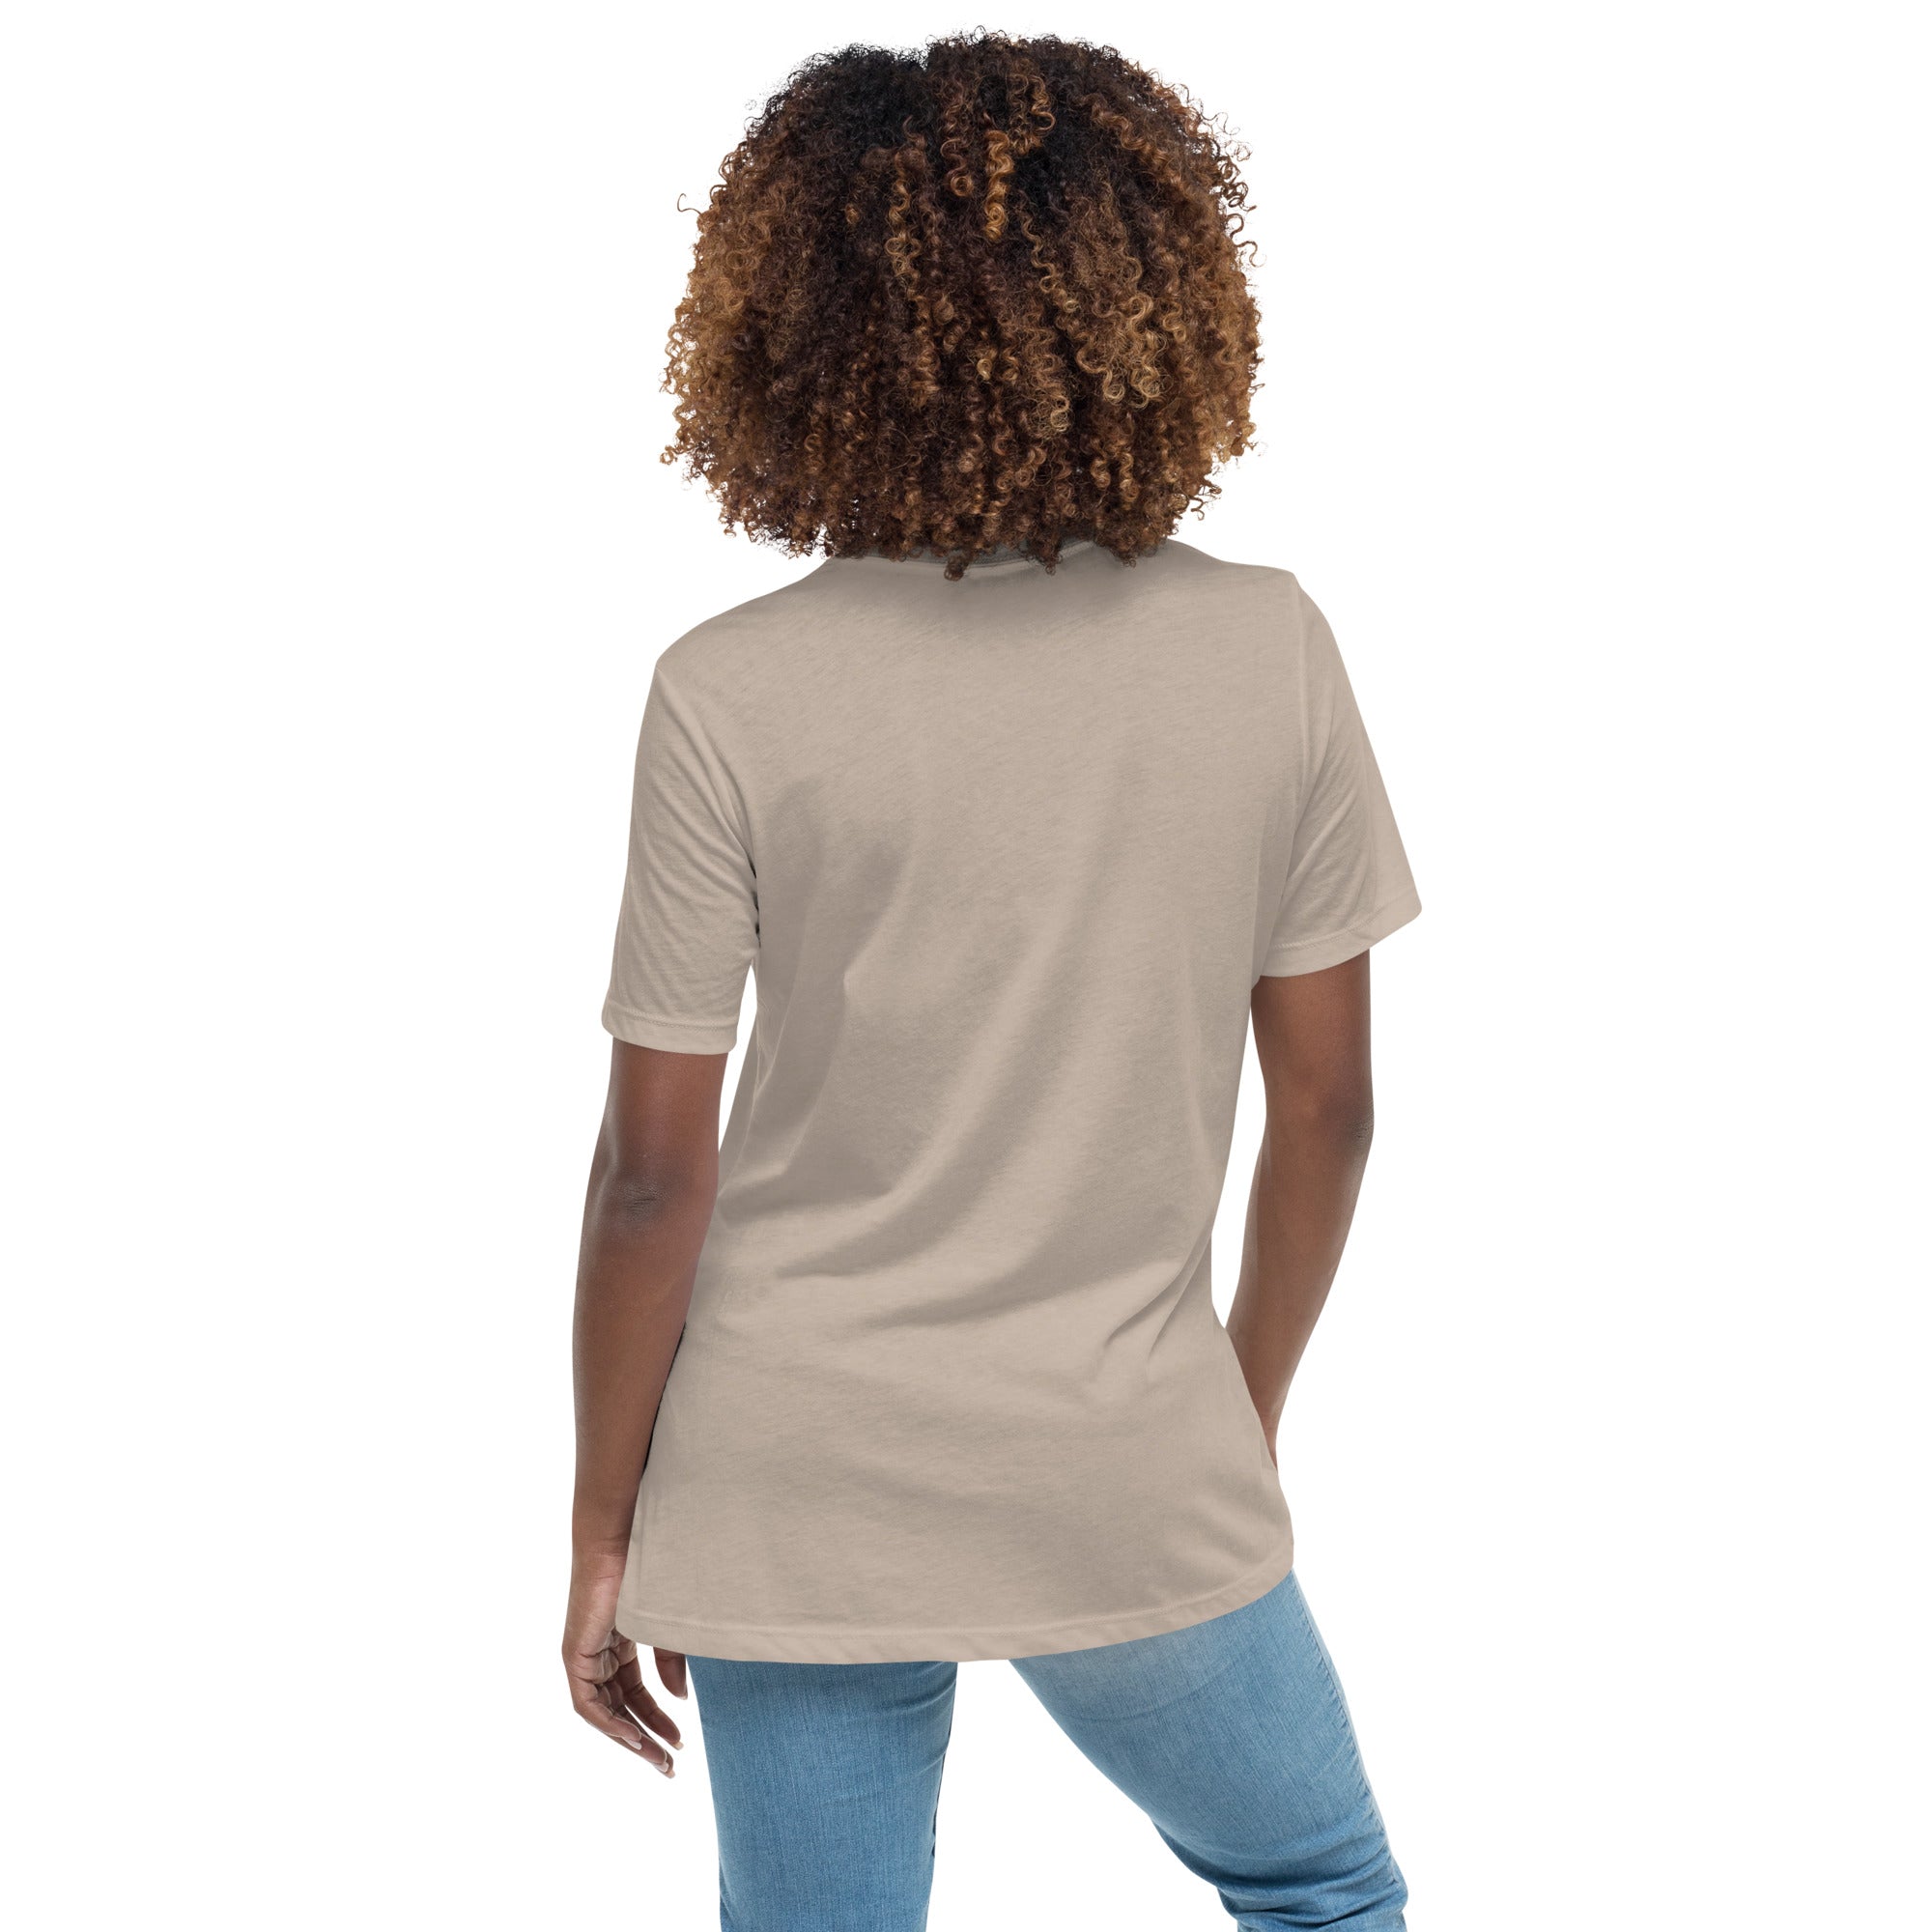 Liberty and Justice Women's Relaxed T-Shirt